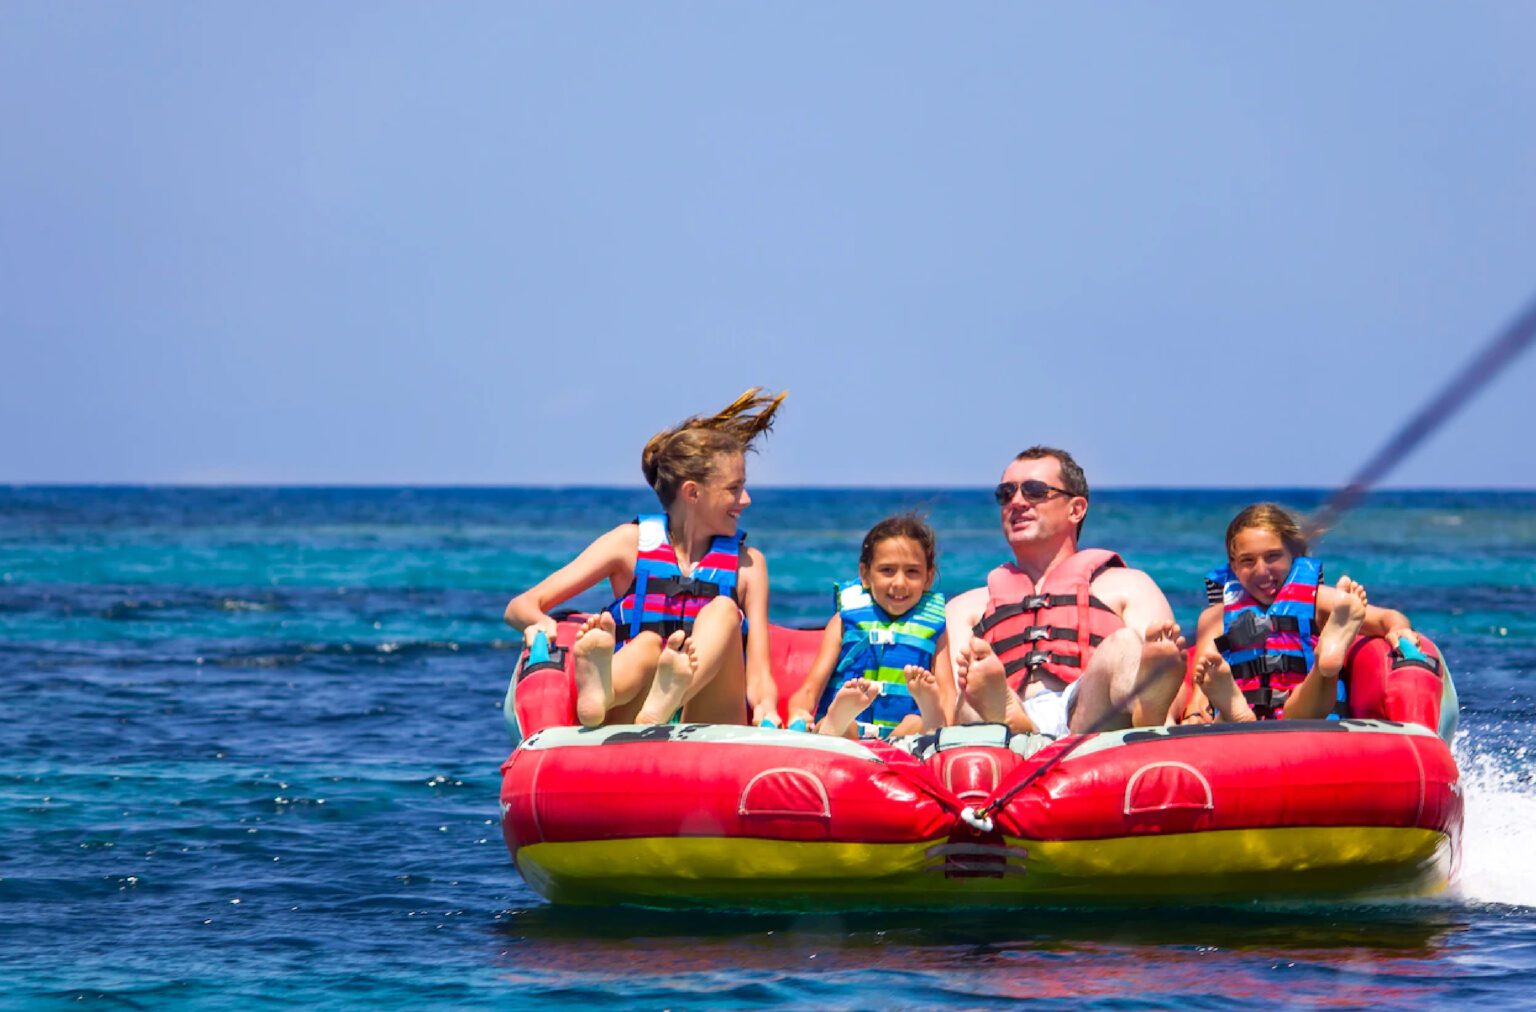 A family experiencing the thrill of gliding through the waves on Donut ride